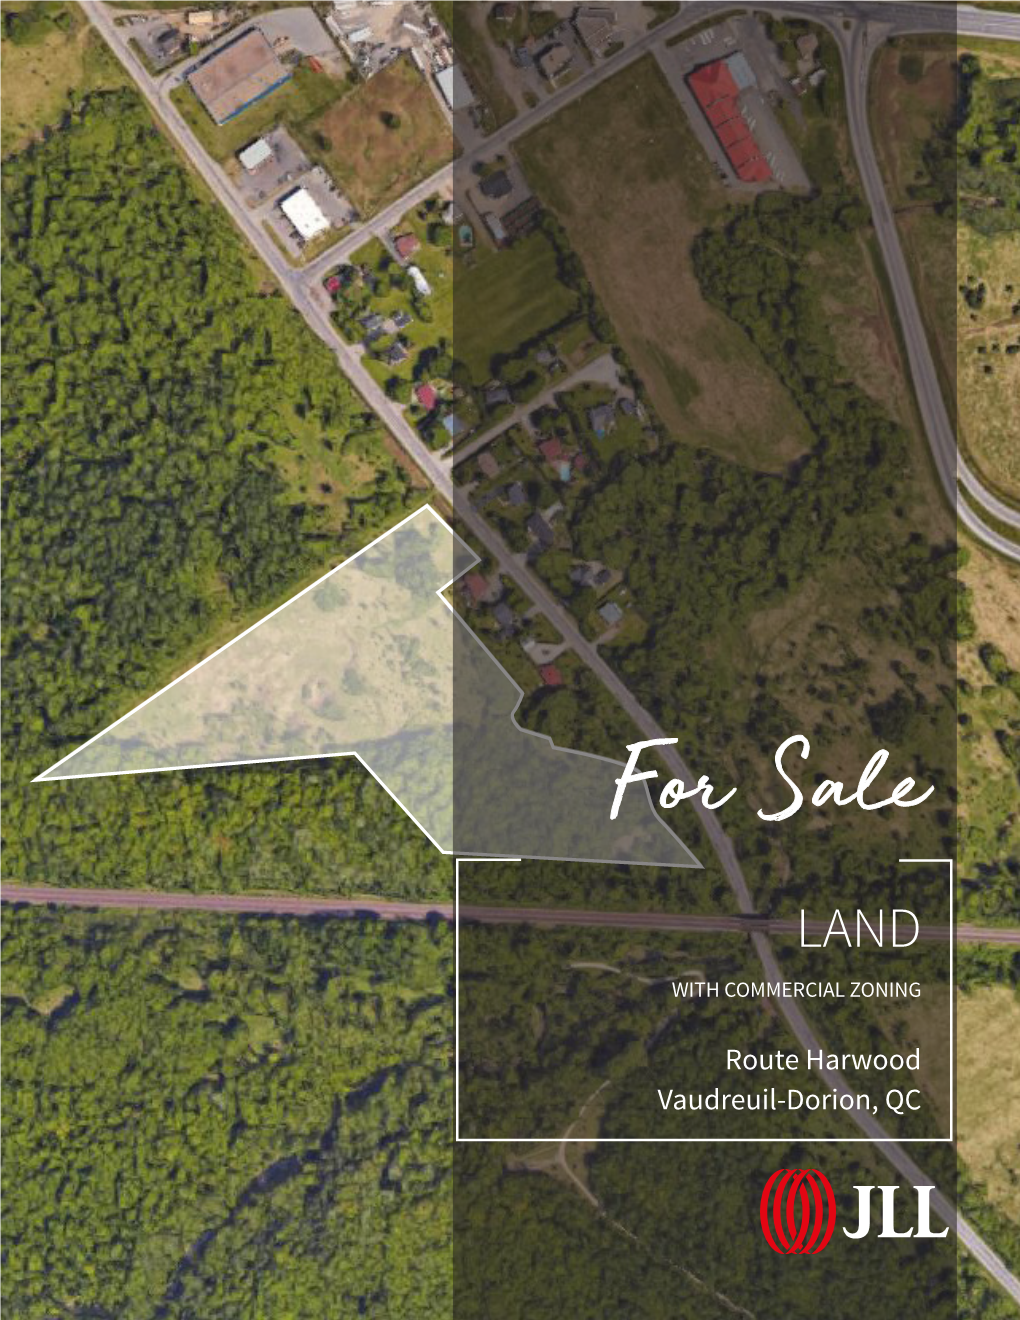 For Sale LAND with COMMERCIAL ZONING